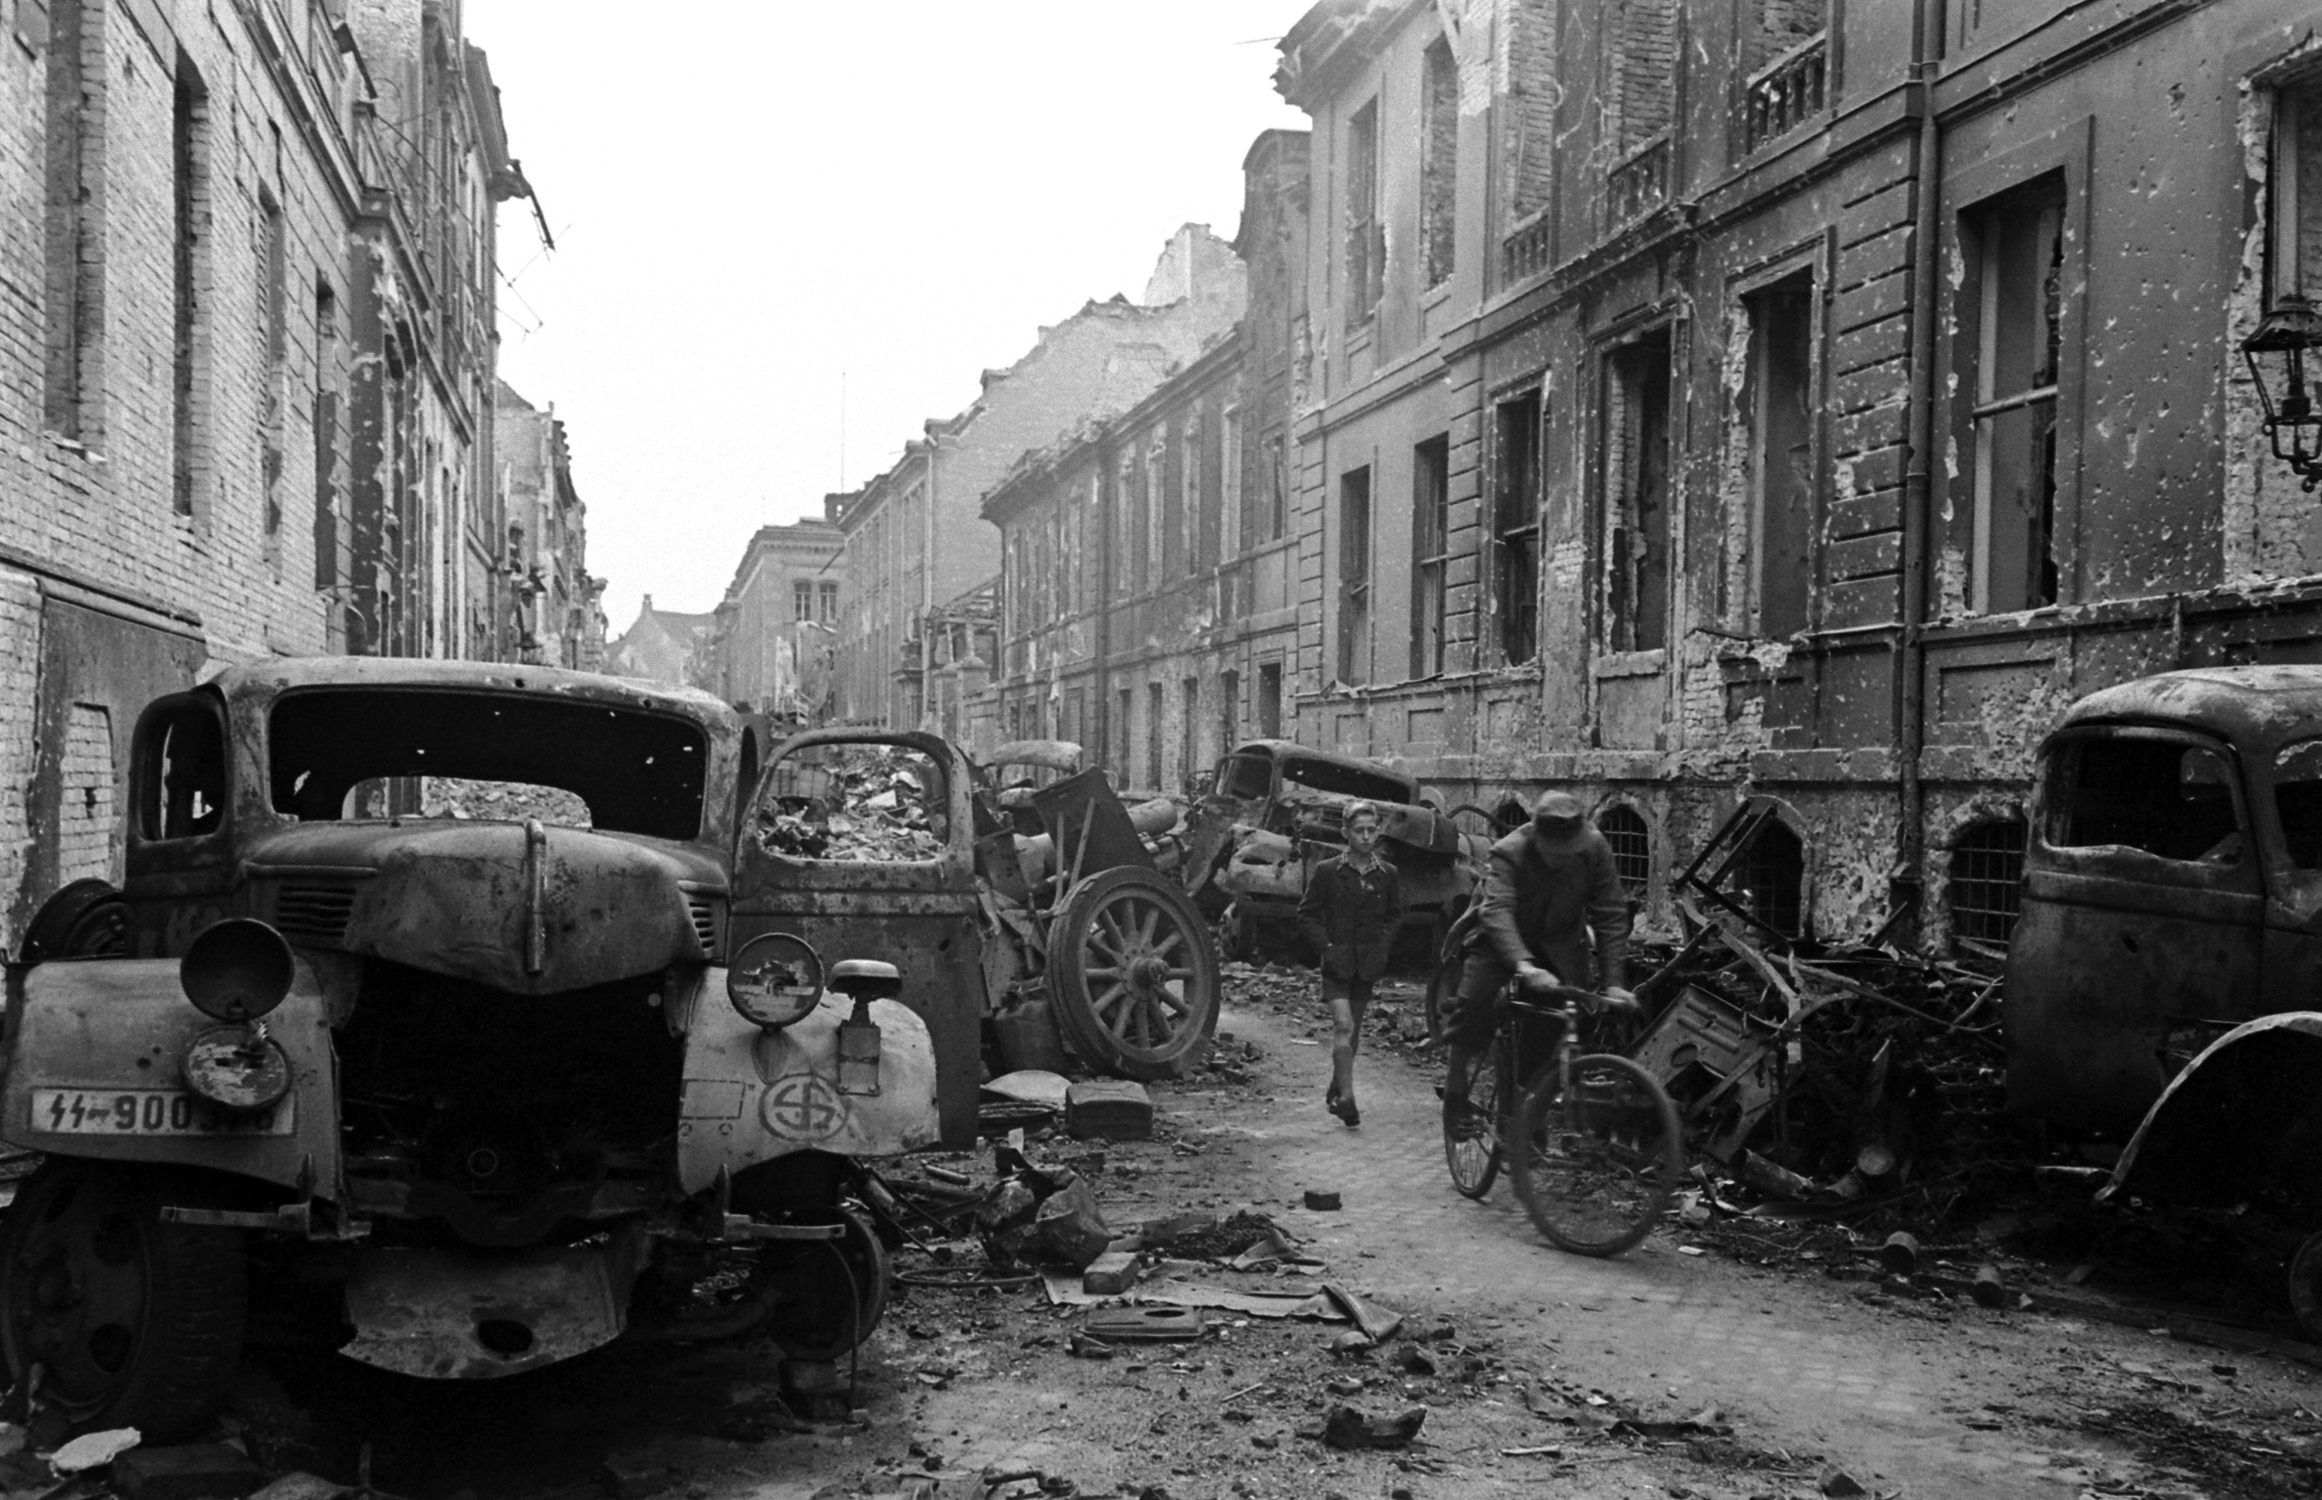 Oberwallstrasse, in central Berlin, saw some of the most vicious fighting between German and Soviet troops in the spring of 1945.